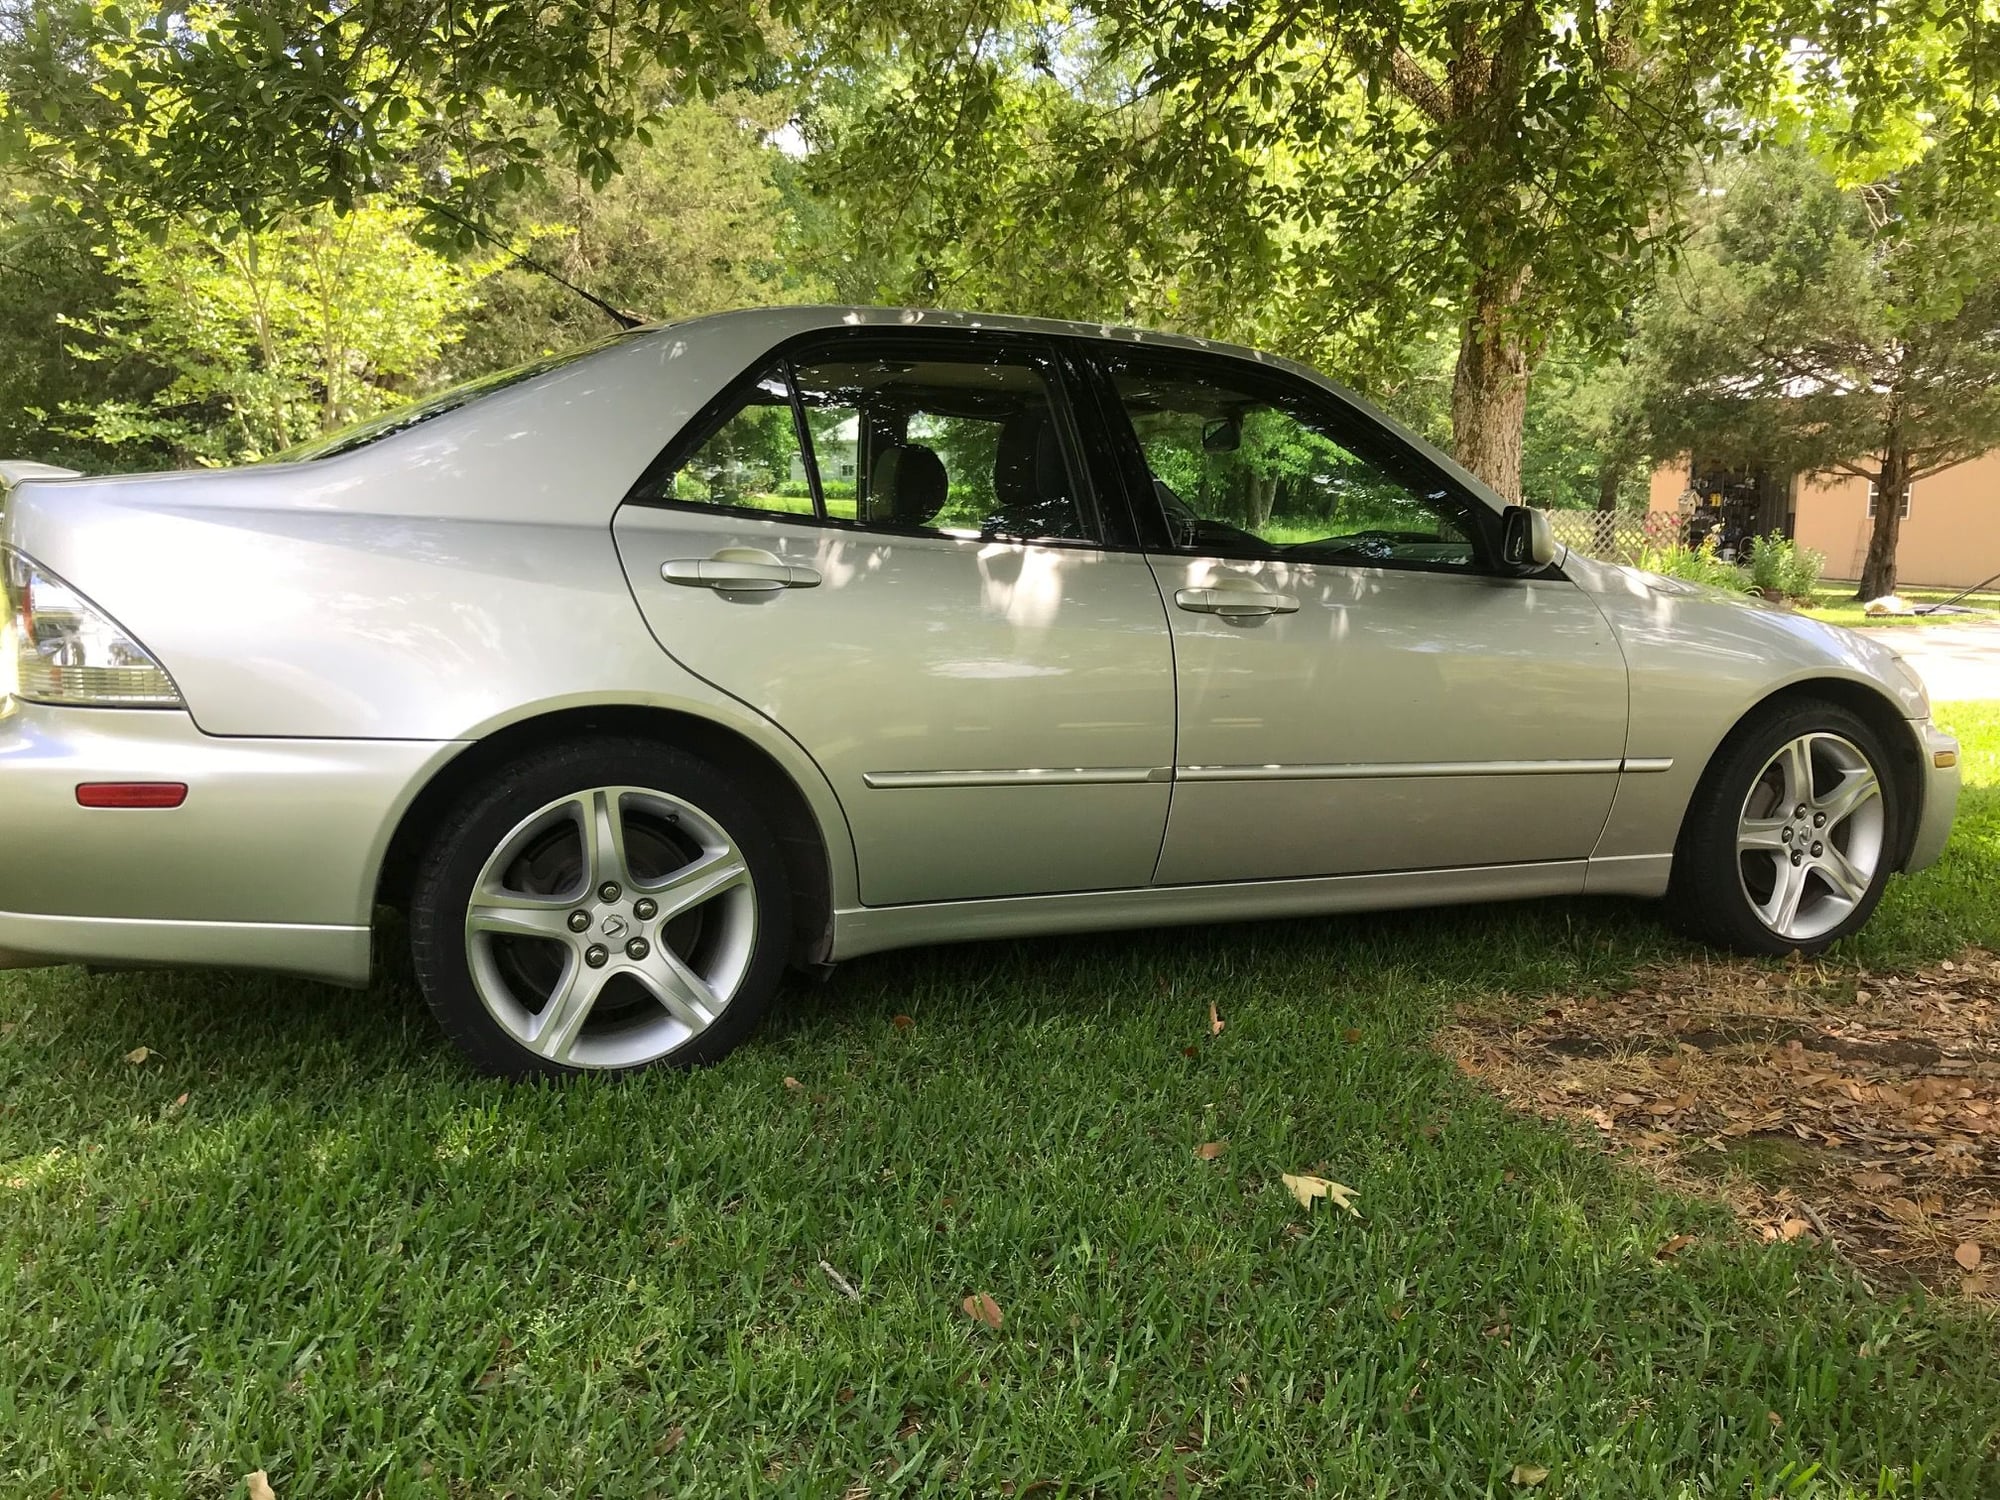 2002 Lexus IS300 - 2002 IS300 5=speed manual - Used - VIN JTHBD192120059356 - 187,000 Miles - 6 cyl - 2WD - Manual - Sedan - Silver - Florence,, MS 30973, United States